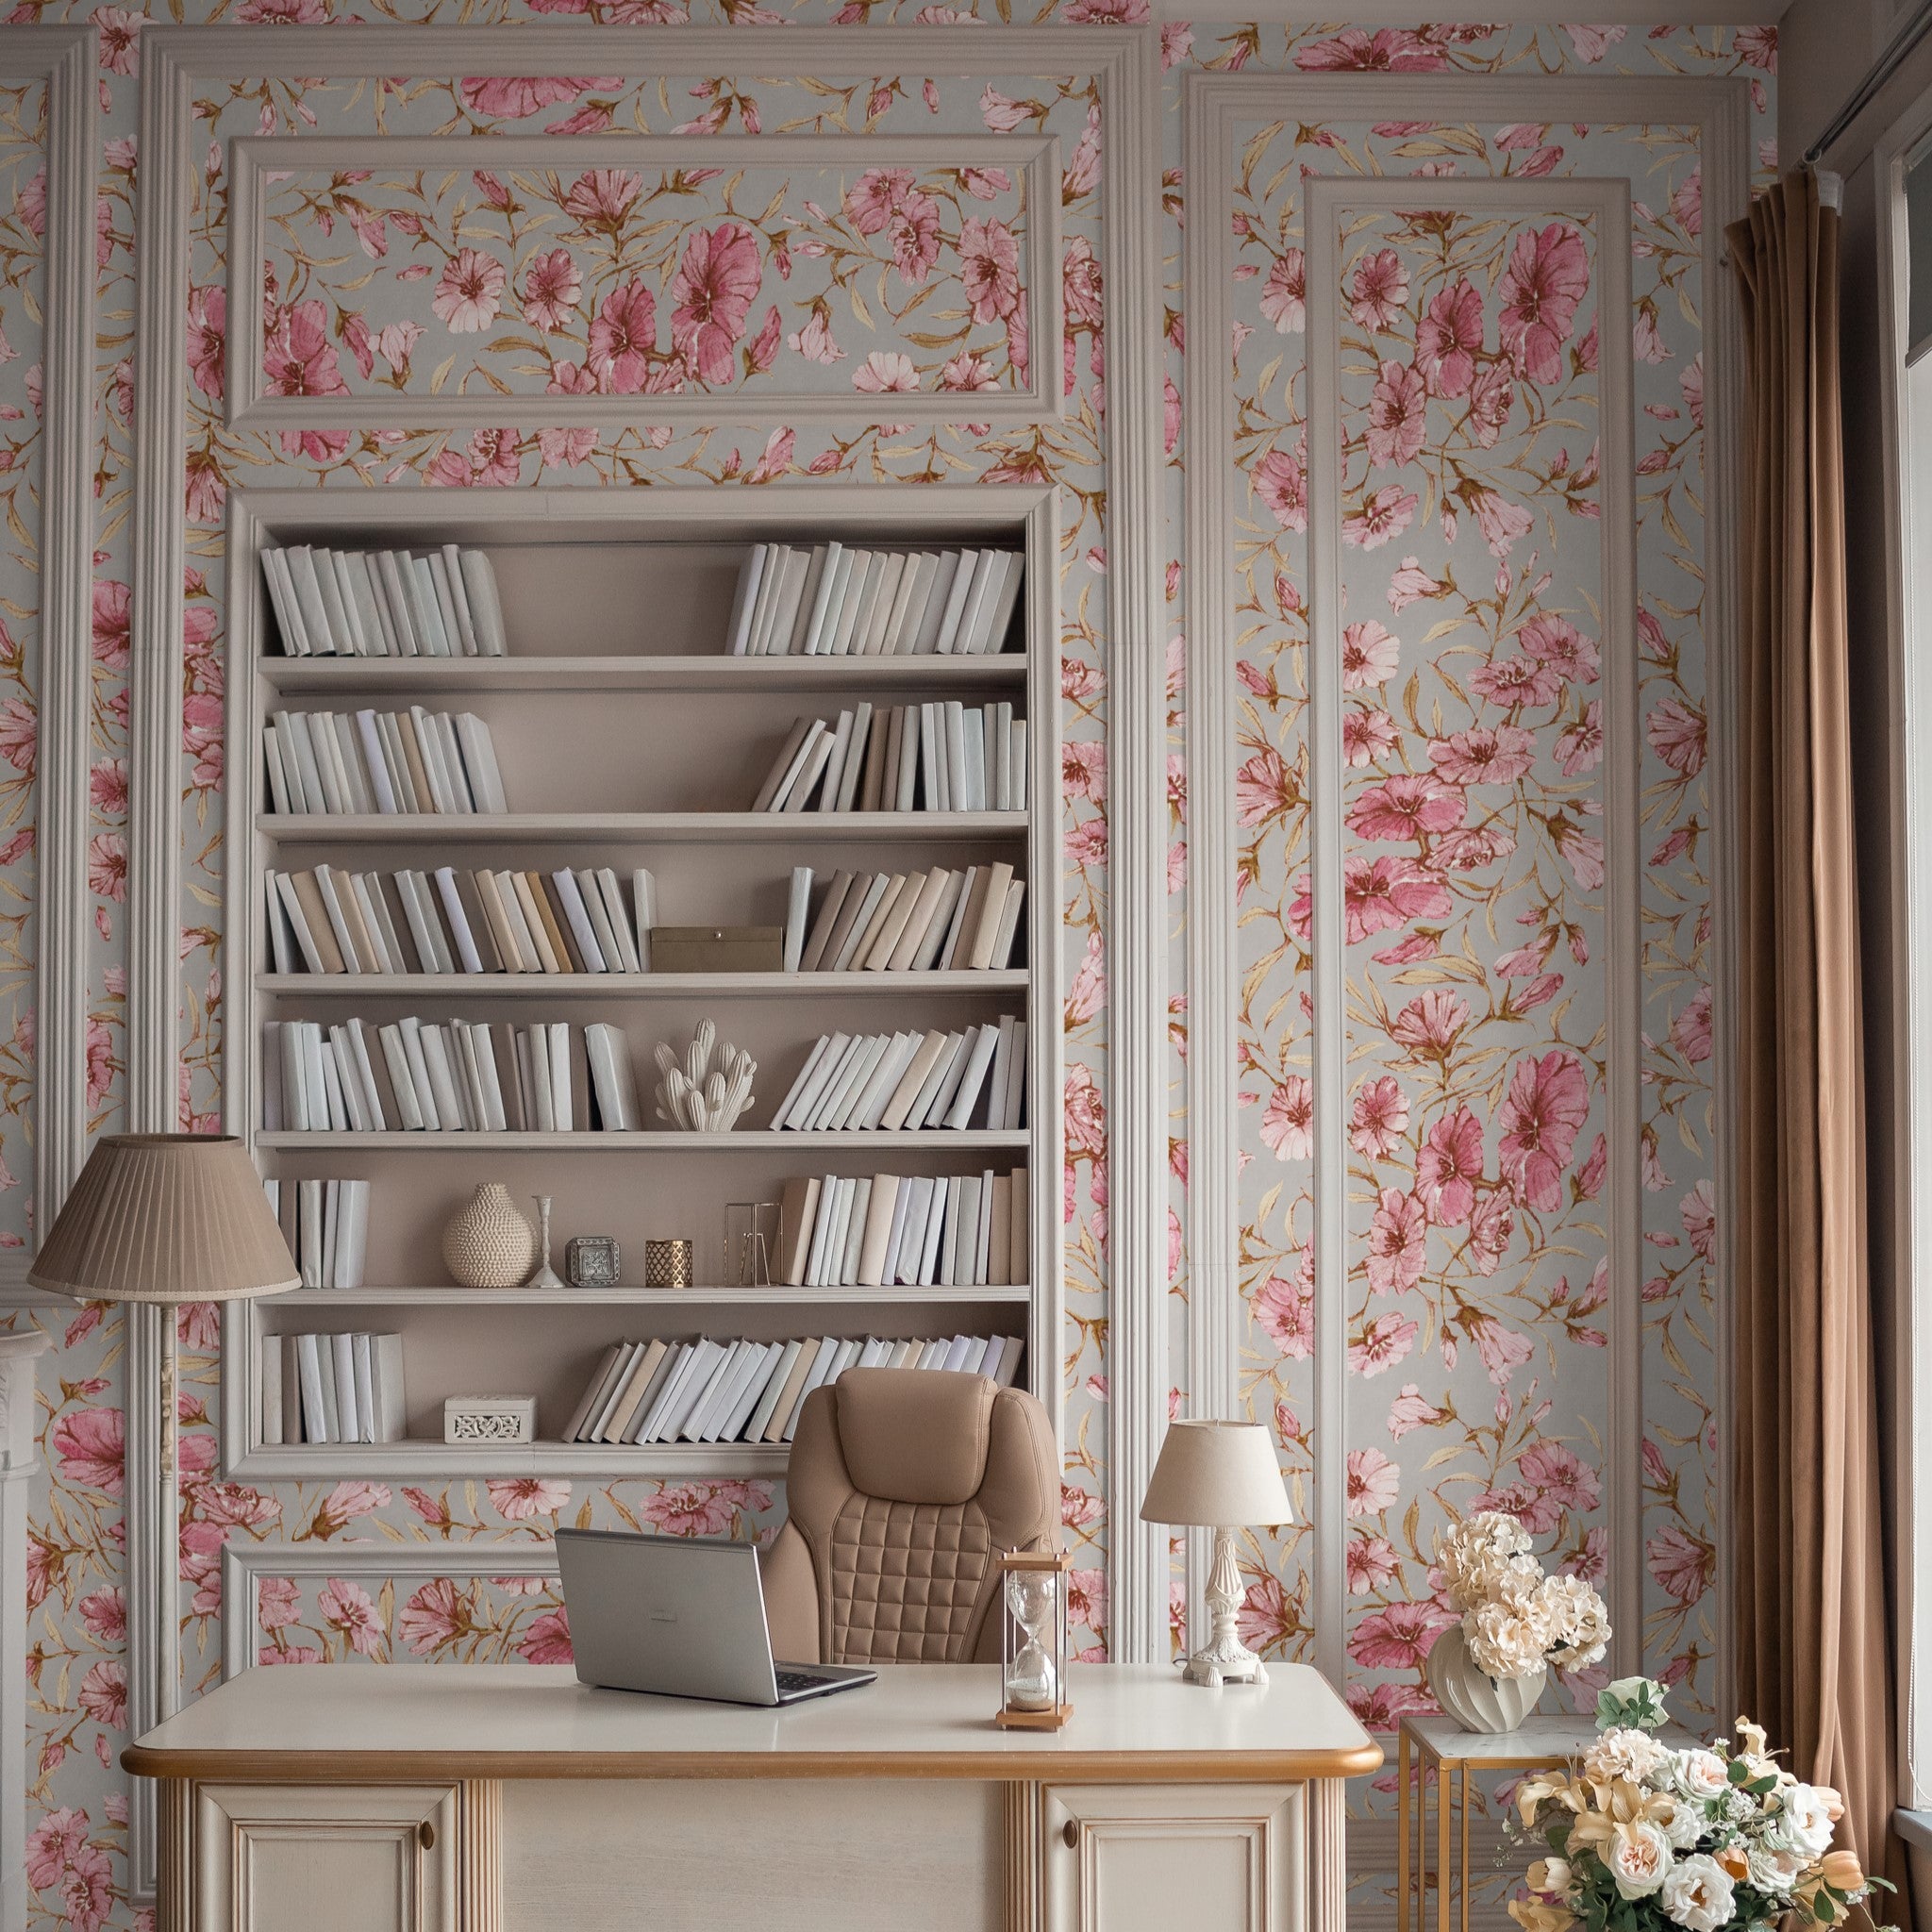 "Wall Blush Rebecca Wallpaper highlighting a sophisticated home office design with elegant floral patterns."